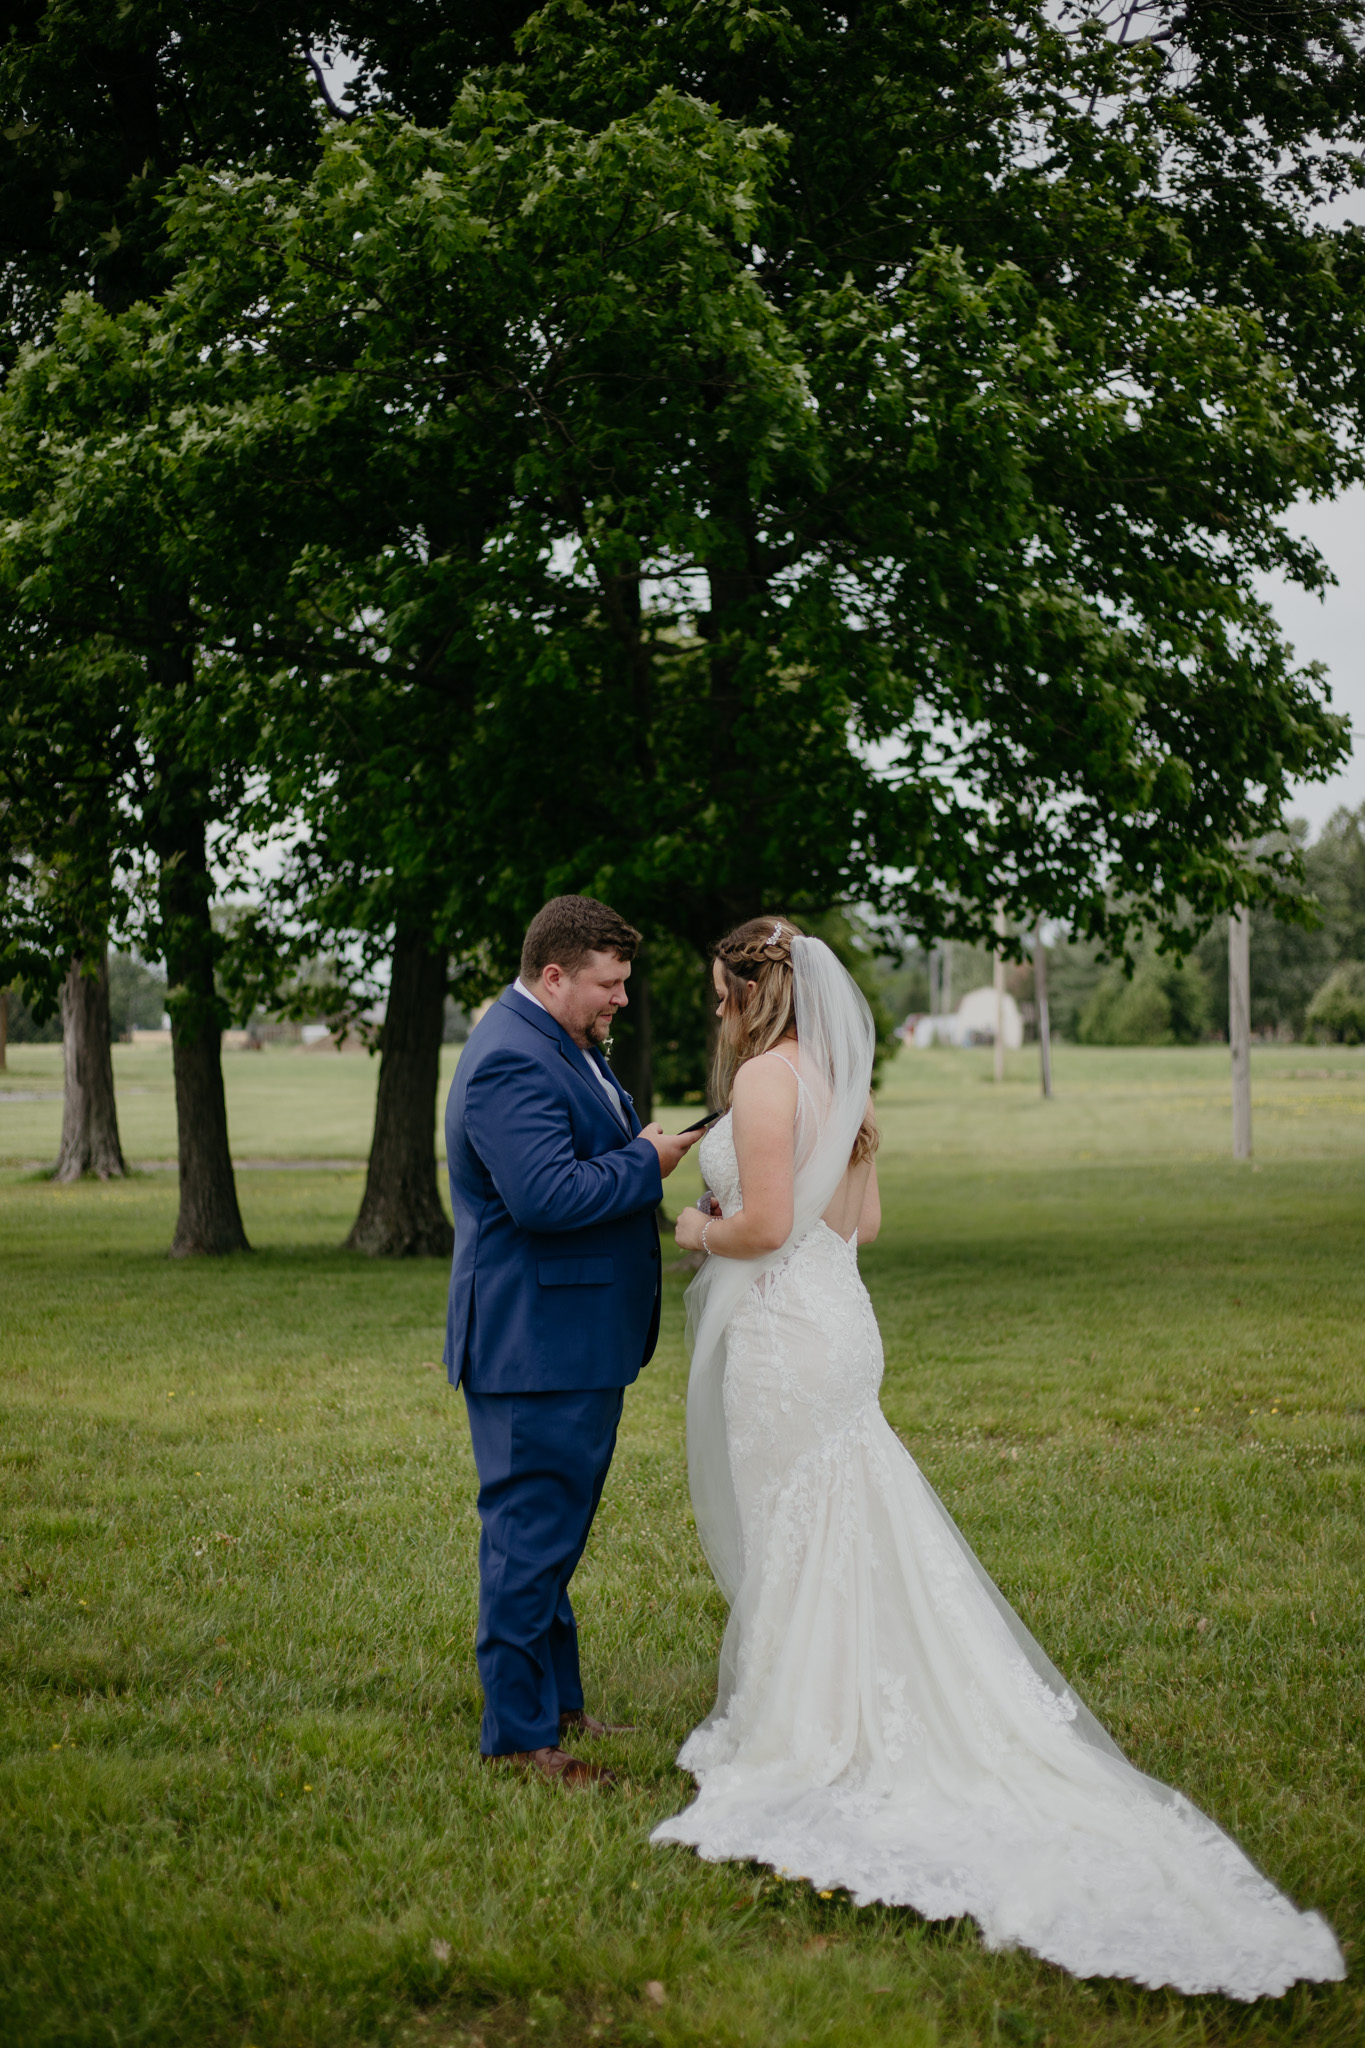 The sweetest first look at this Indiana summer wedding